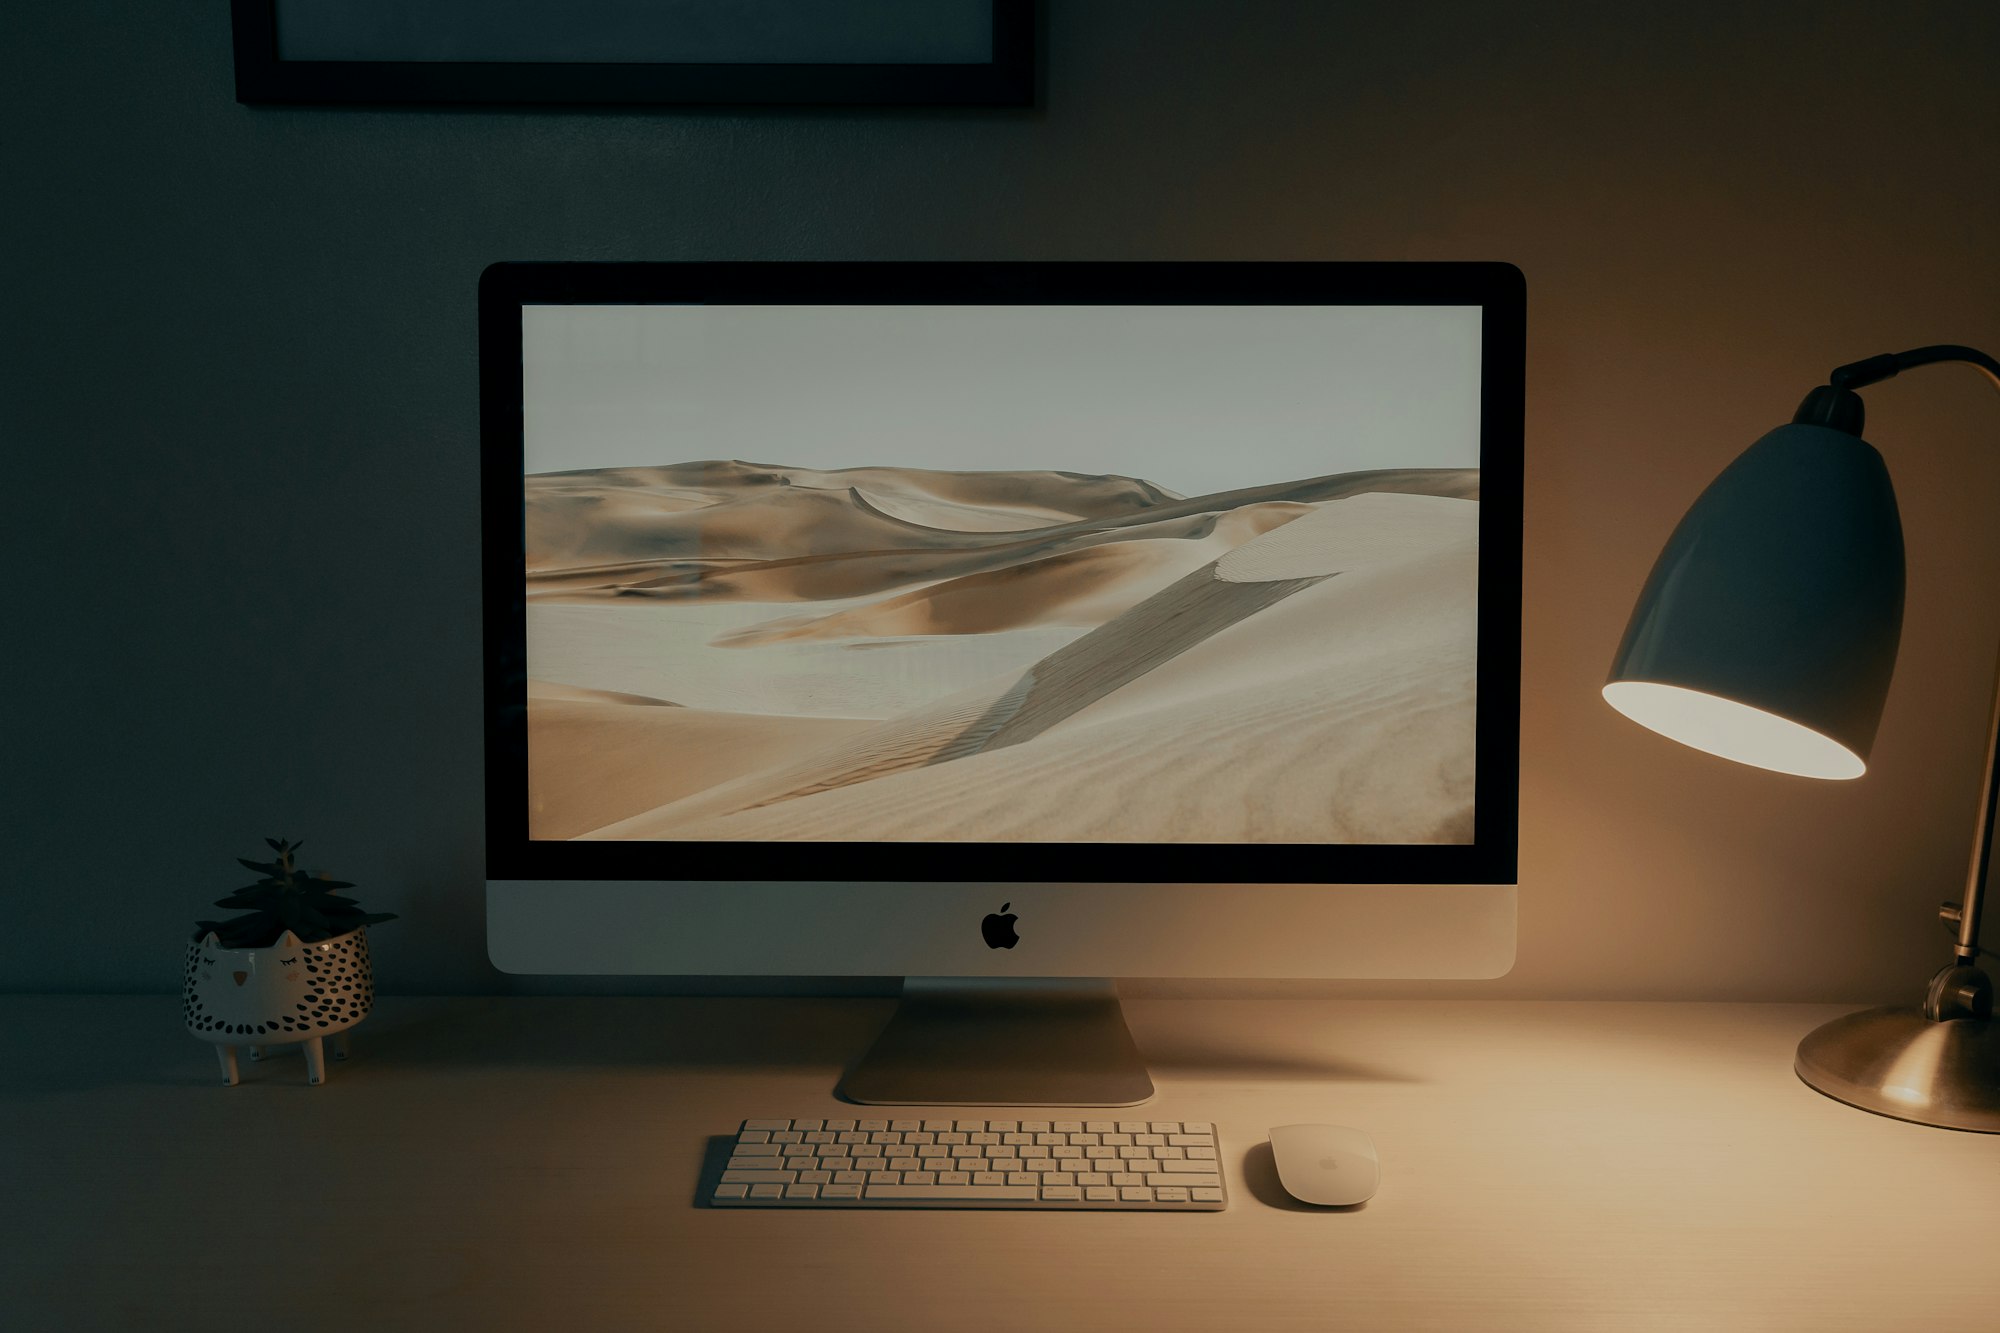 How to control your external display brightness on macOS and Arch Linux